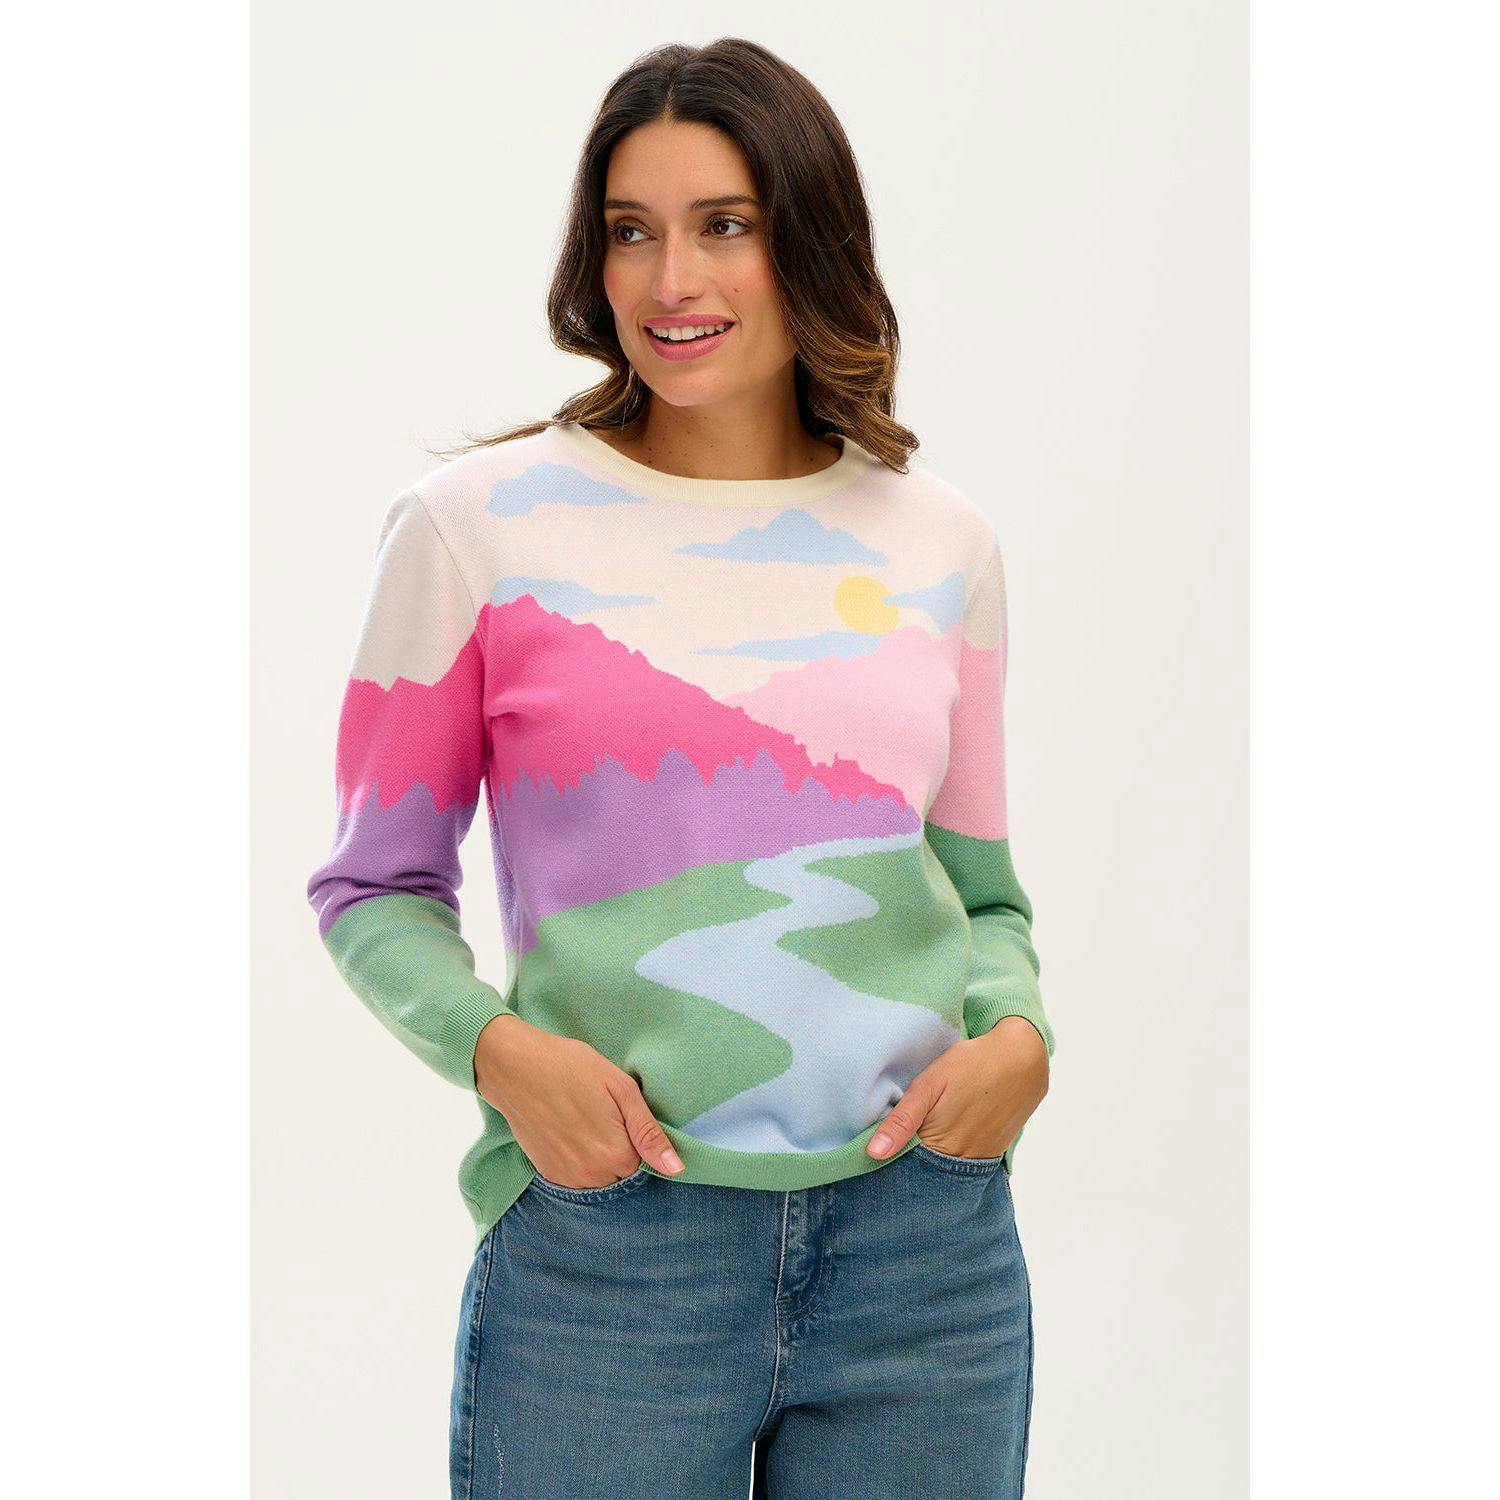 https://res.cloudinary.com/wolfandbadger/image/upload/c_pad,h_1500,w_1500/products/janie-jumper-multi-pastel-valley-scene__37cad83492325d698dd295f930cb5e2d